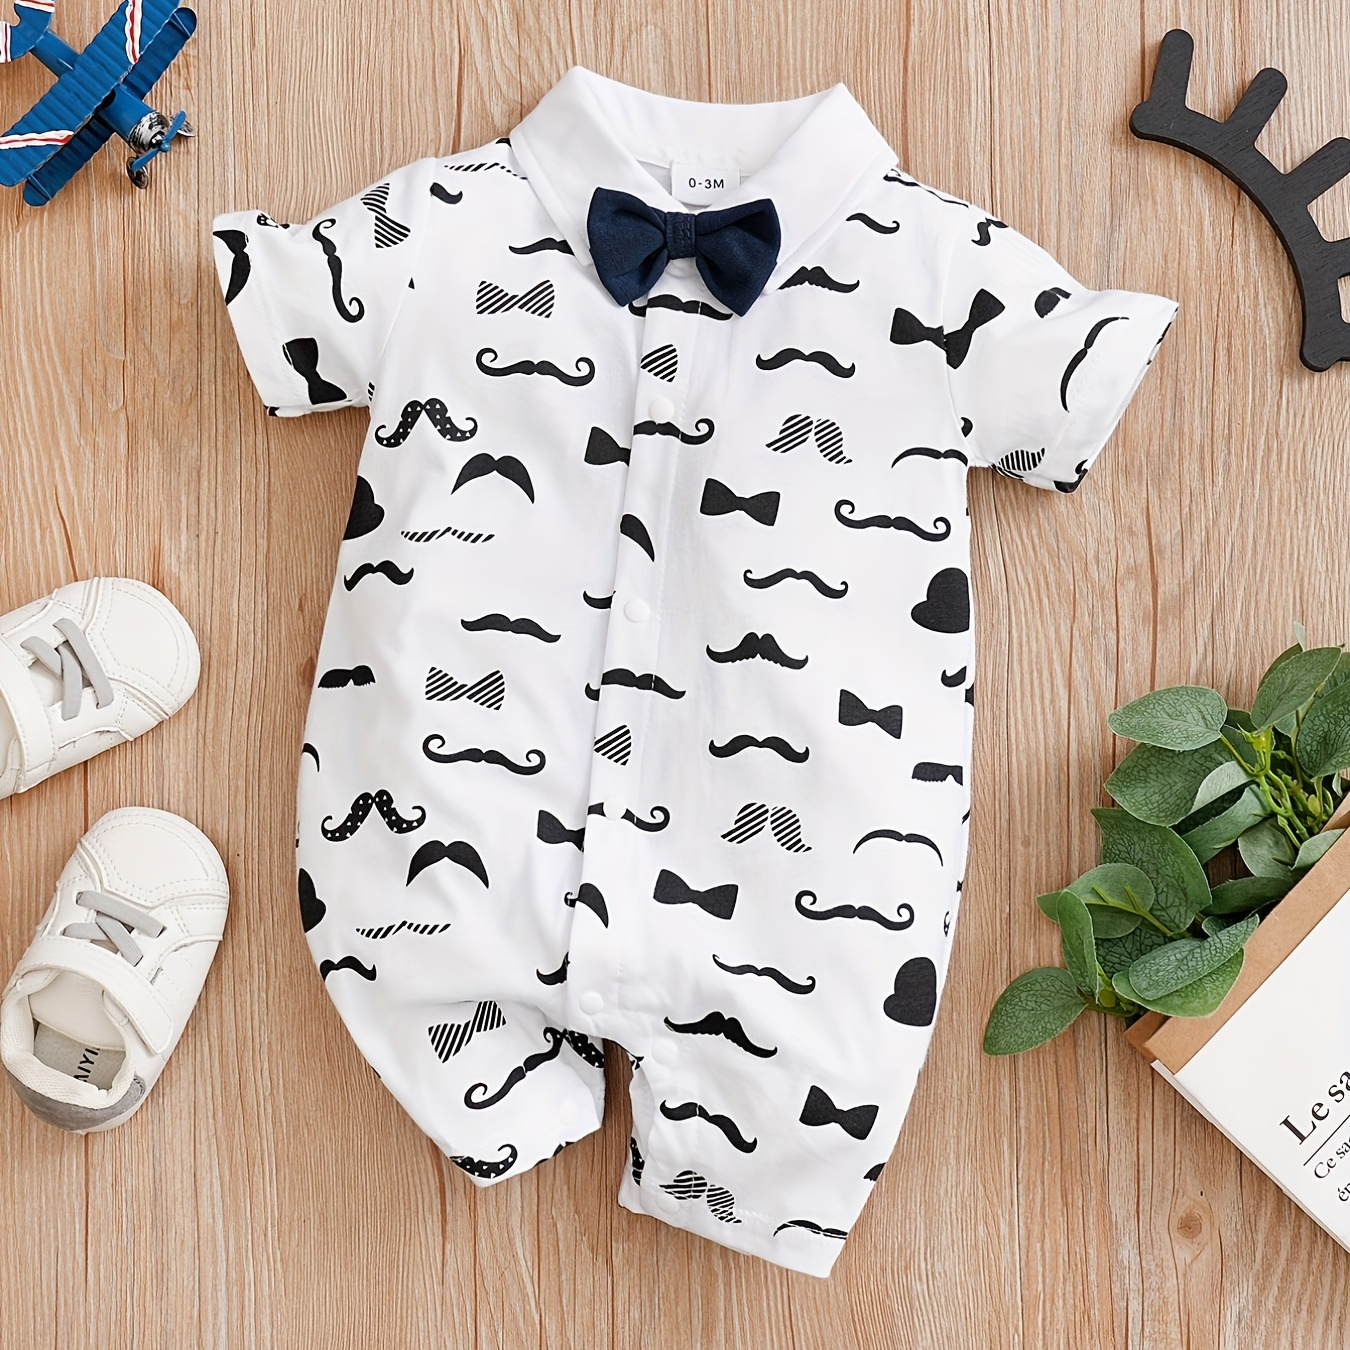 

Baby Boys Casual Cute Bow Tie Cotton Onesie With Mustache Print For Summer Holiday Party